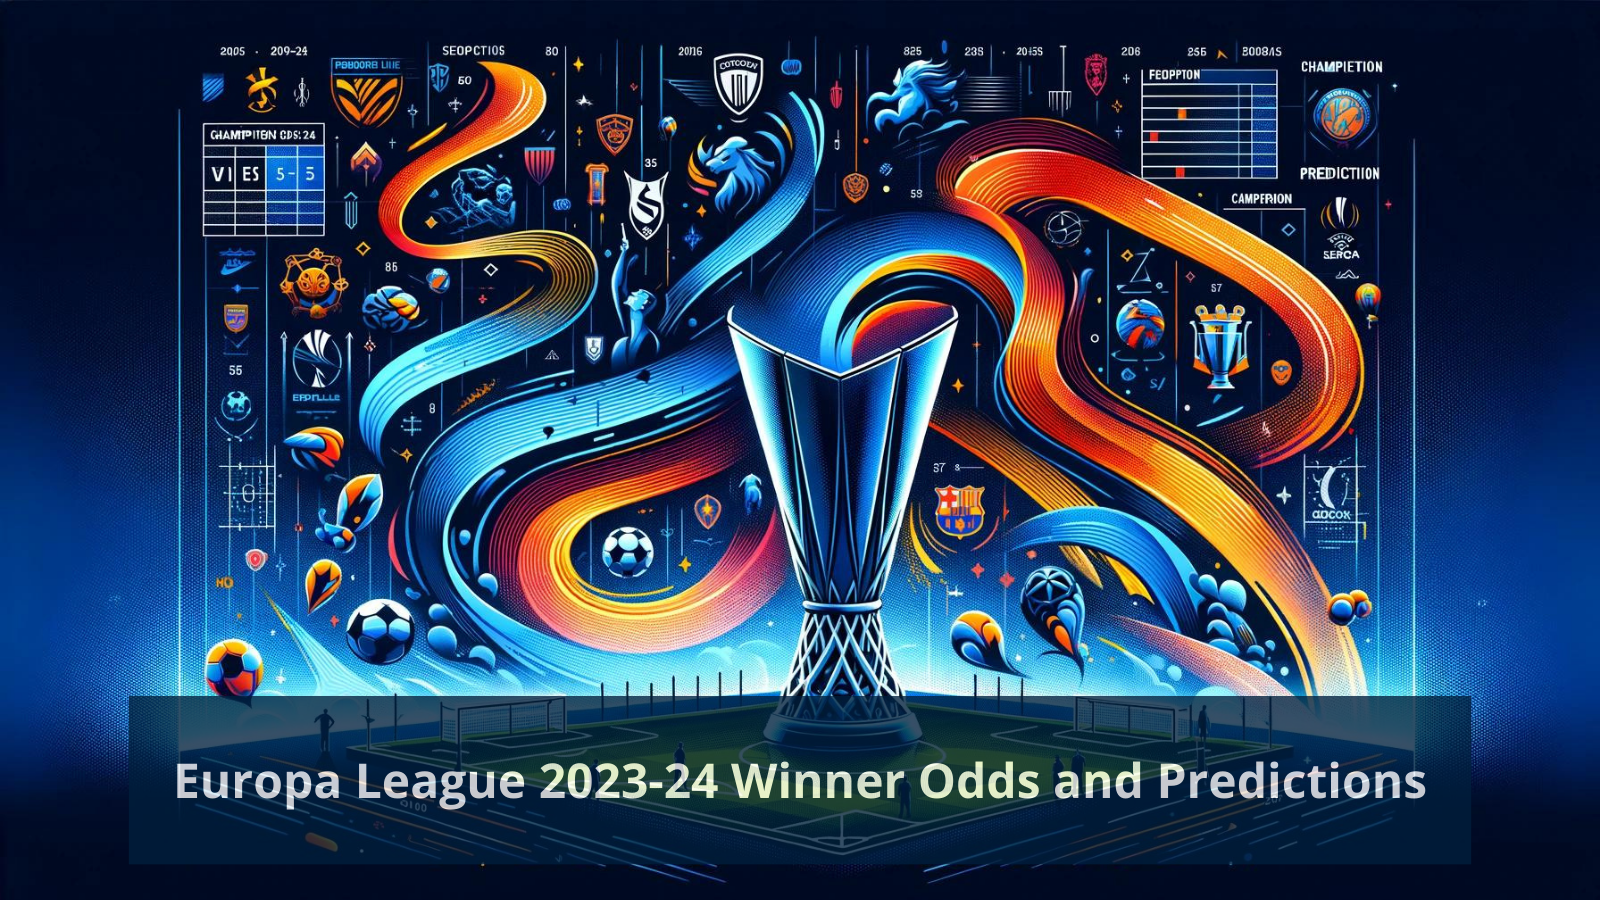 Europa League 2023-24 Winner Odds and Predictions